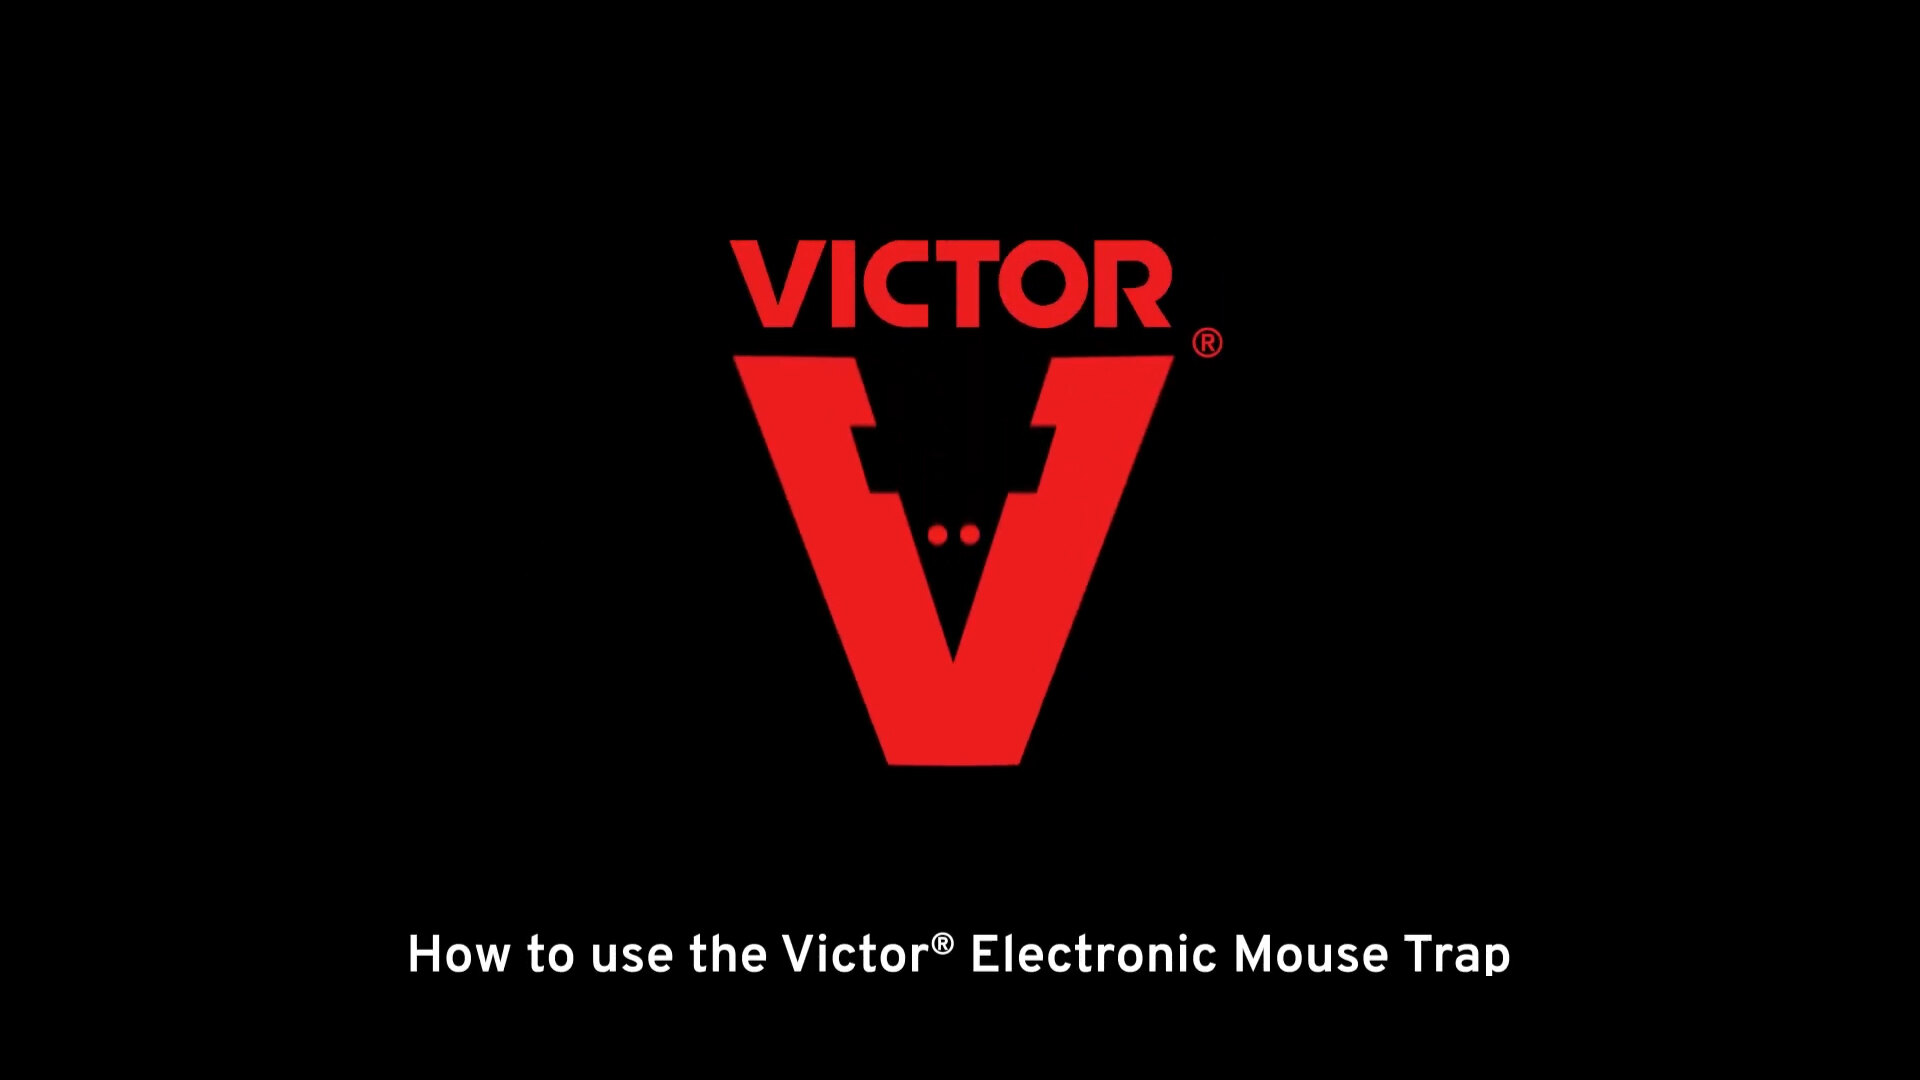 https://cdn.webstaurantstore.com/images/videos/extra_large/howto_howtoelectricmousetrap_thumb.jpg